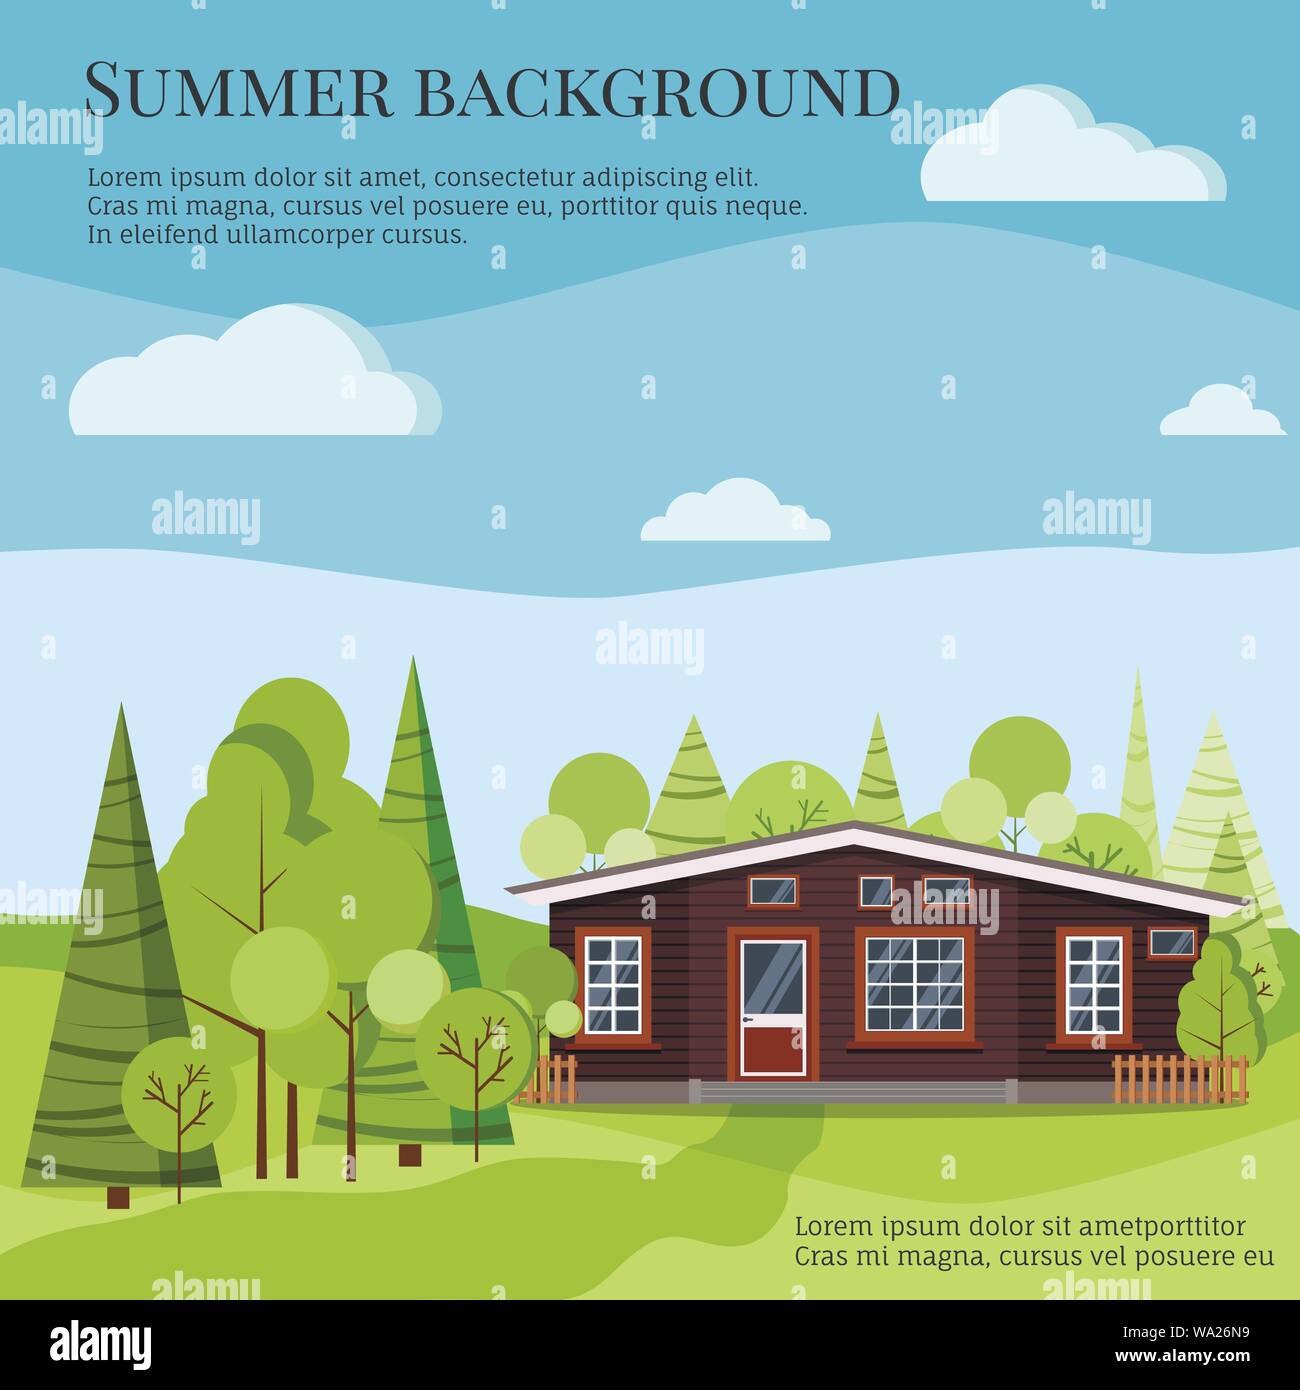 Summer or spring landscape banner background with wooden country rural farm house Stock Vector